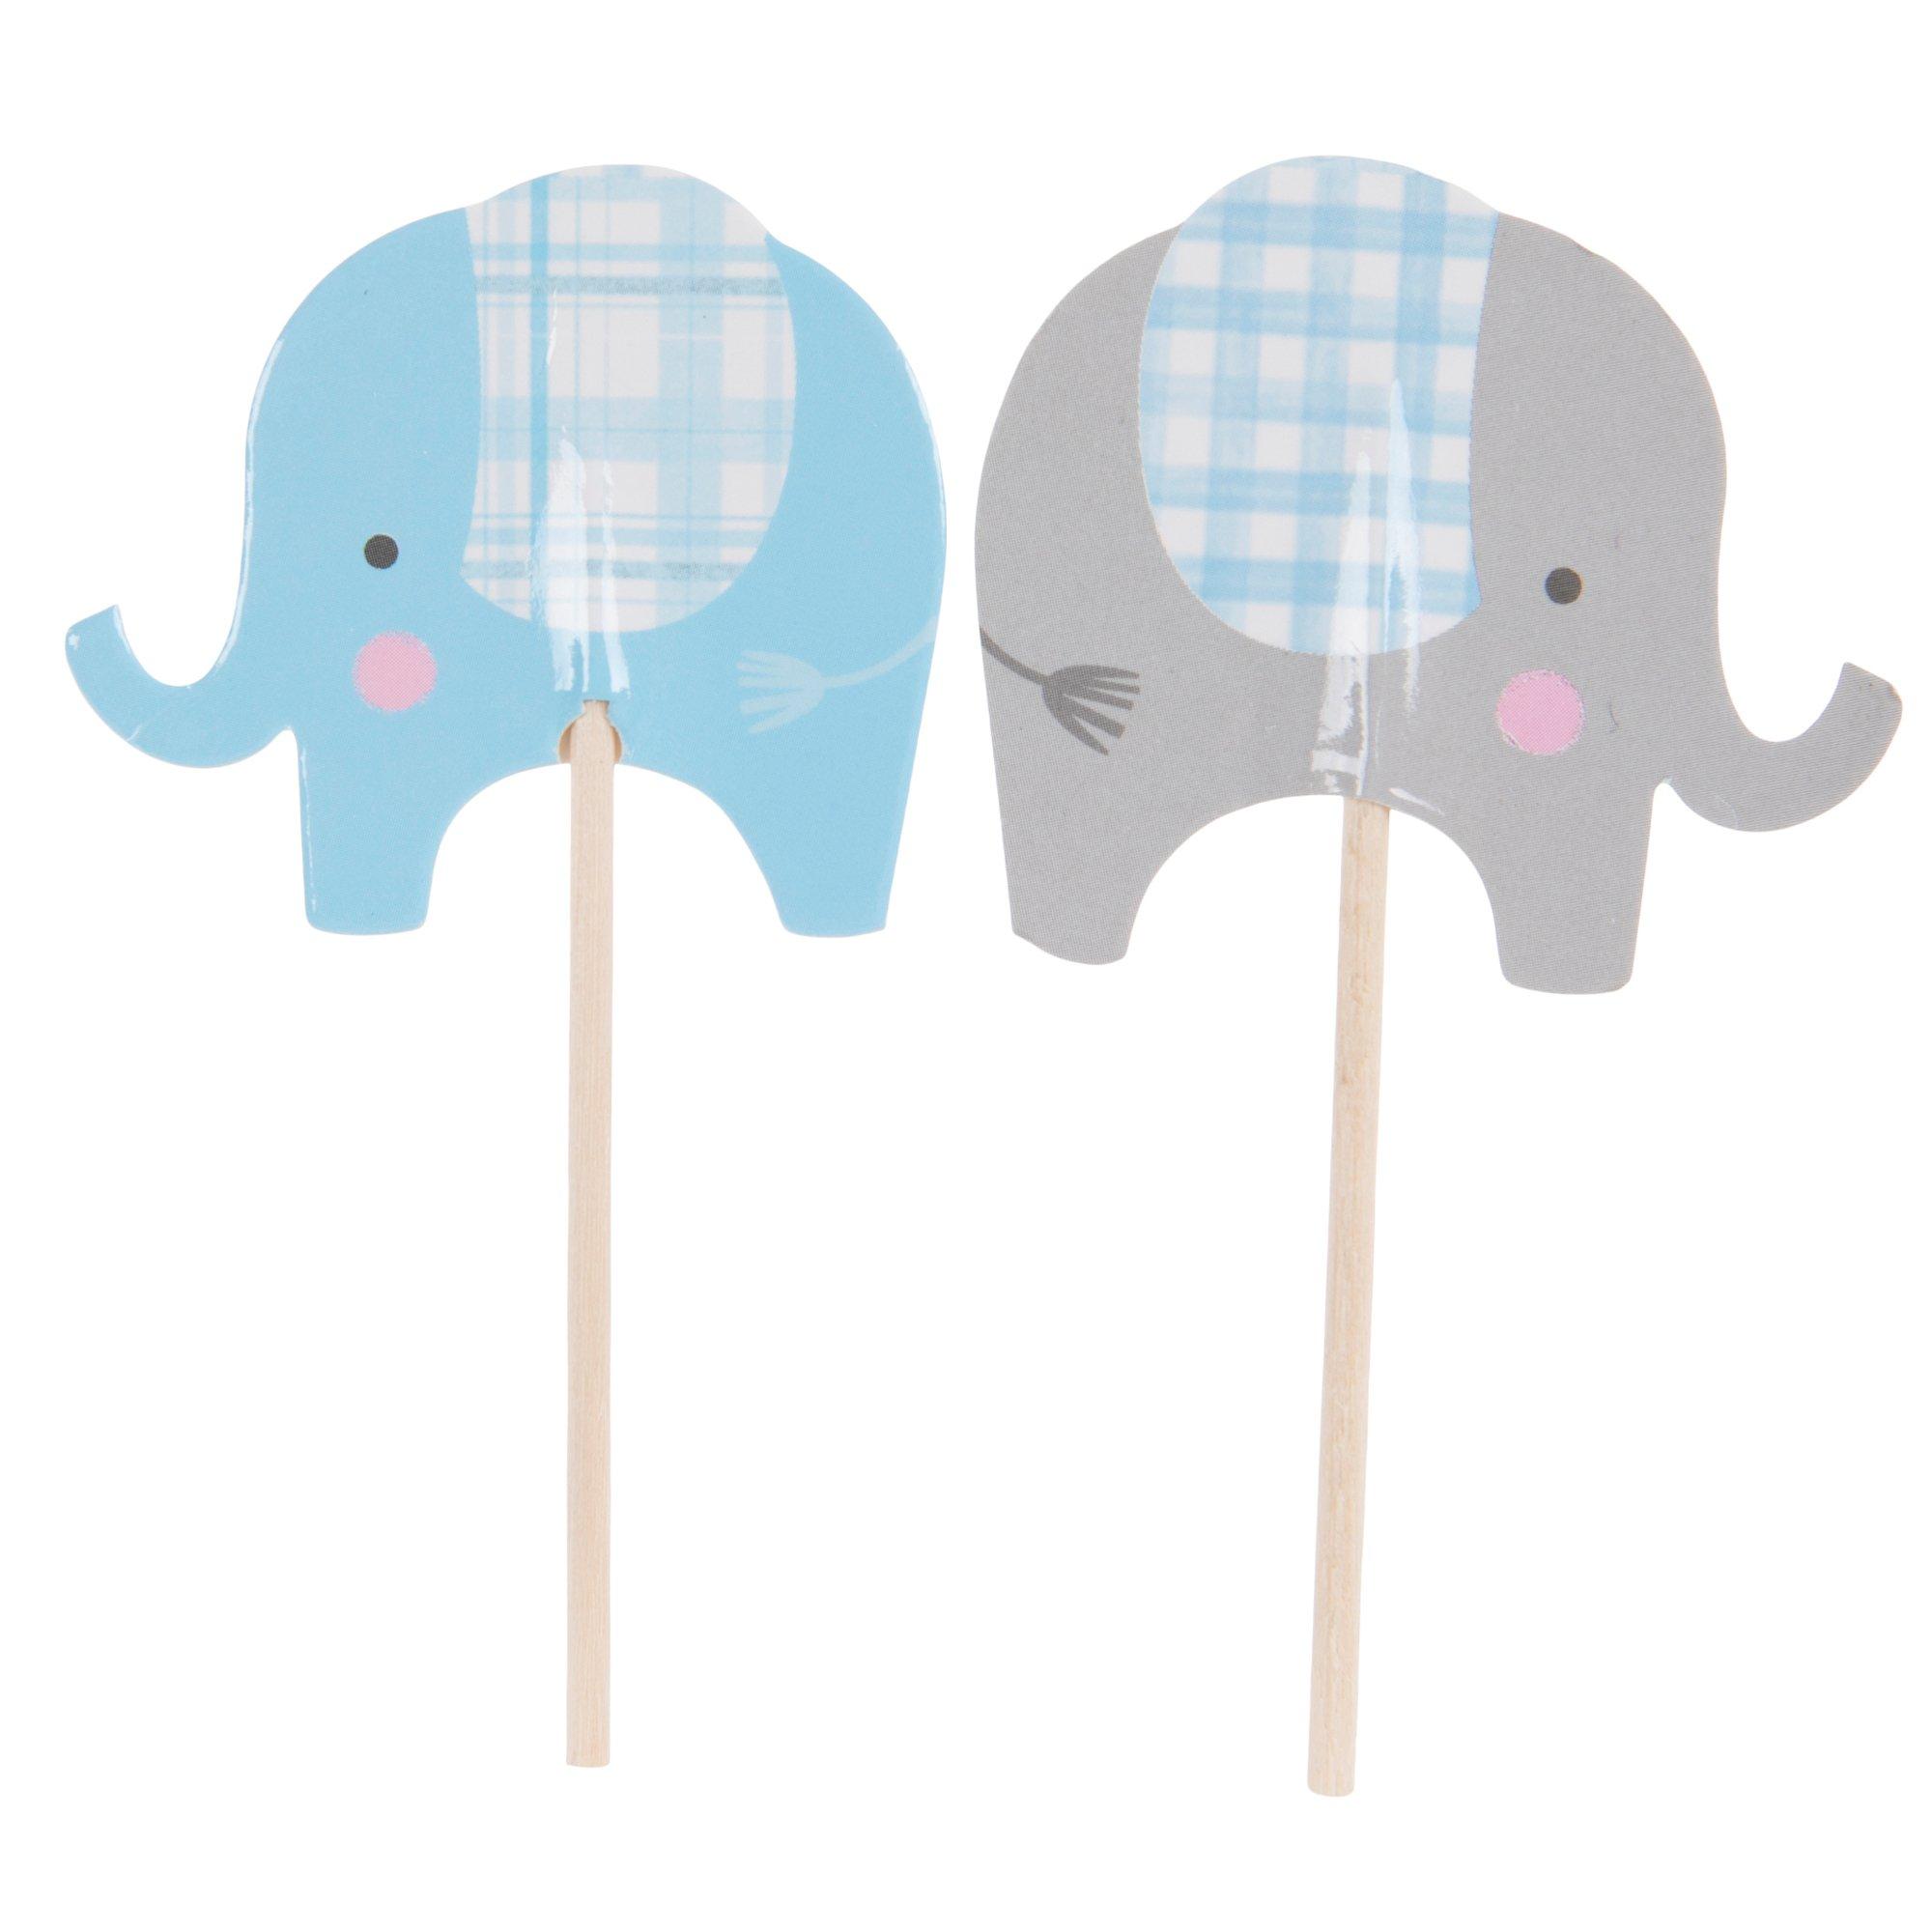 6x Elephant Edible Fondant Cupcake Toppers Pink, Blue, White Baby Shower Cake Decoration